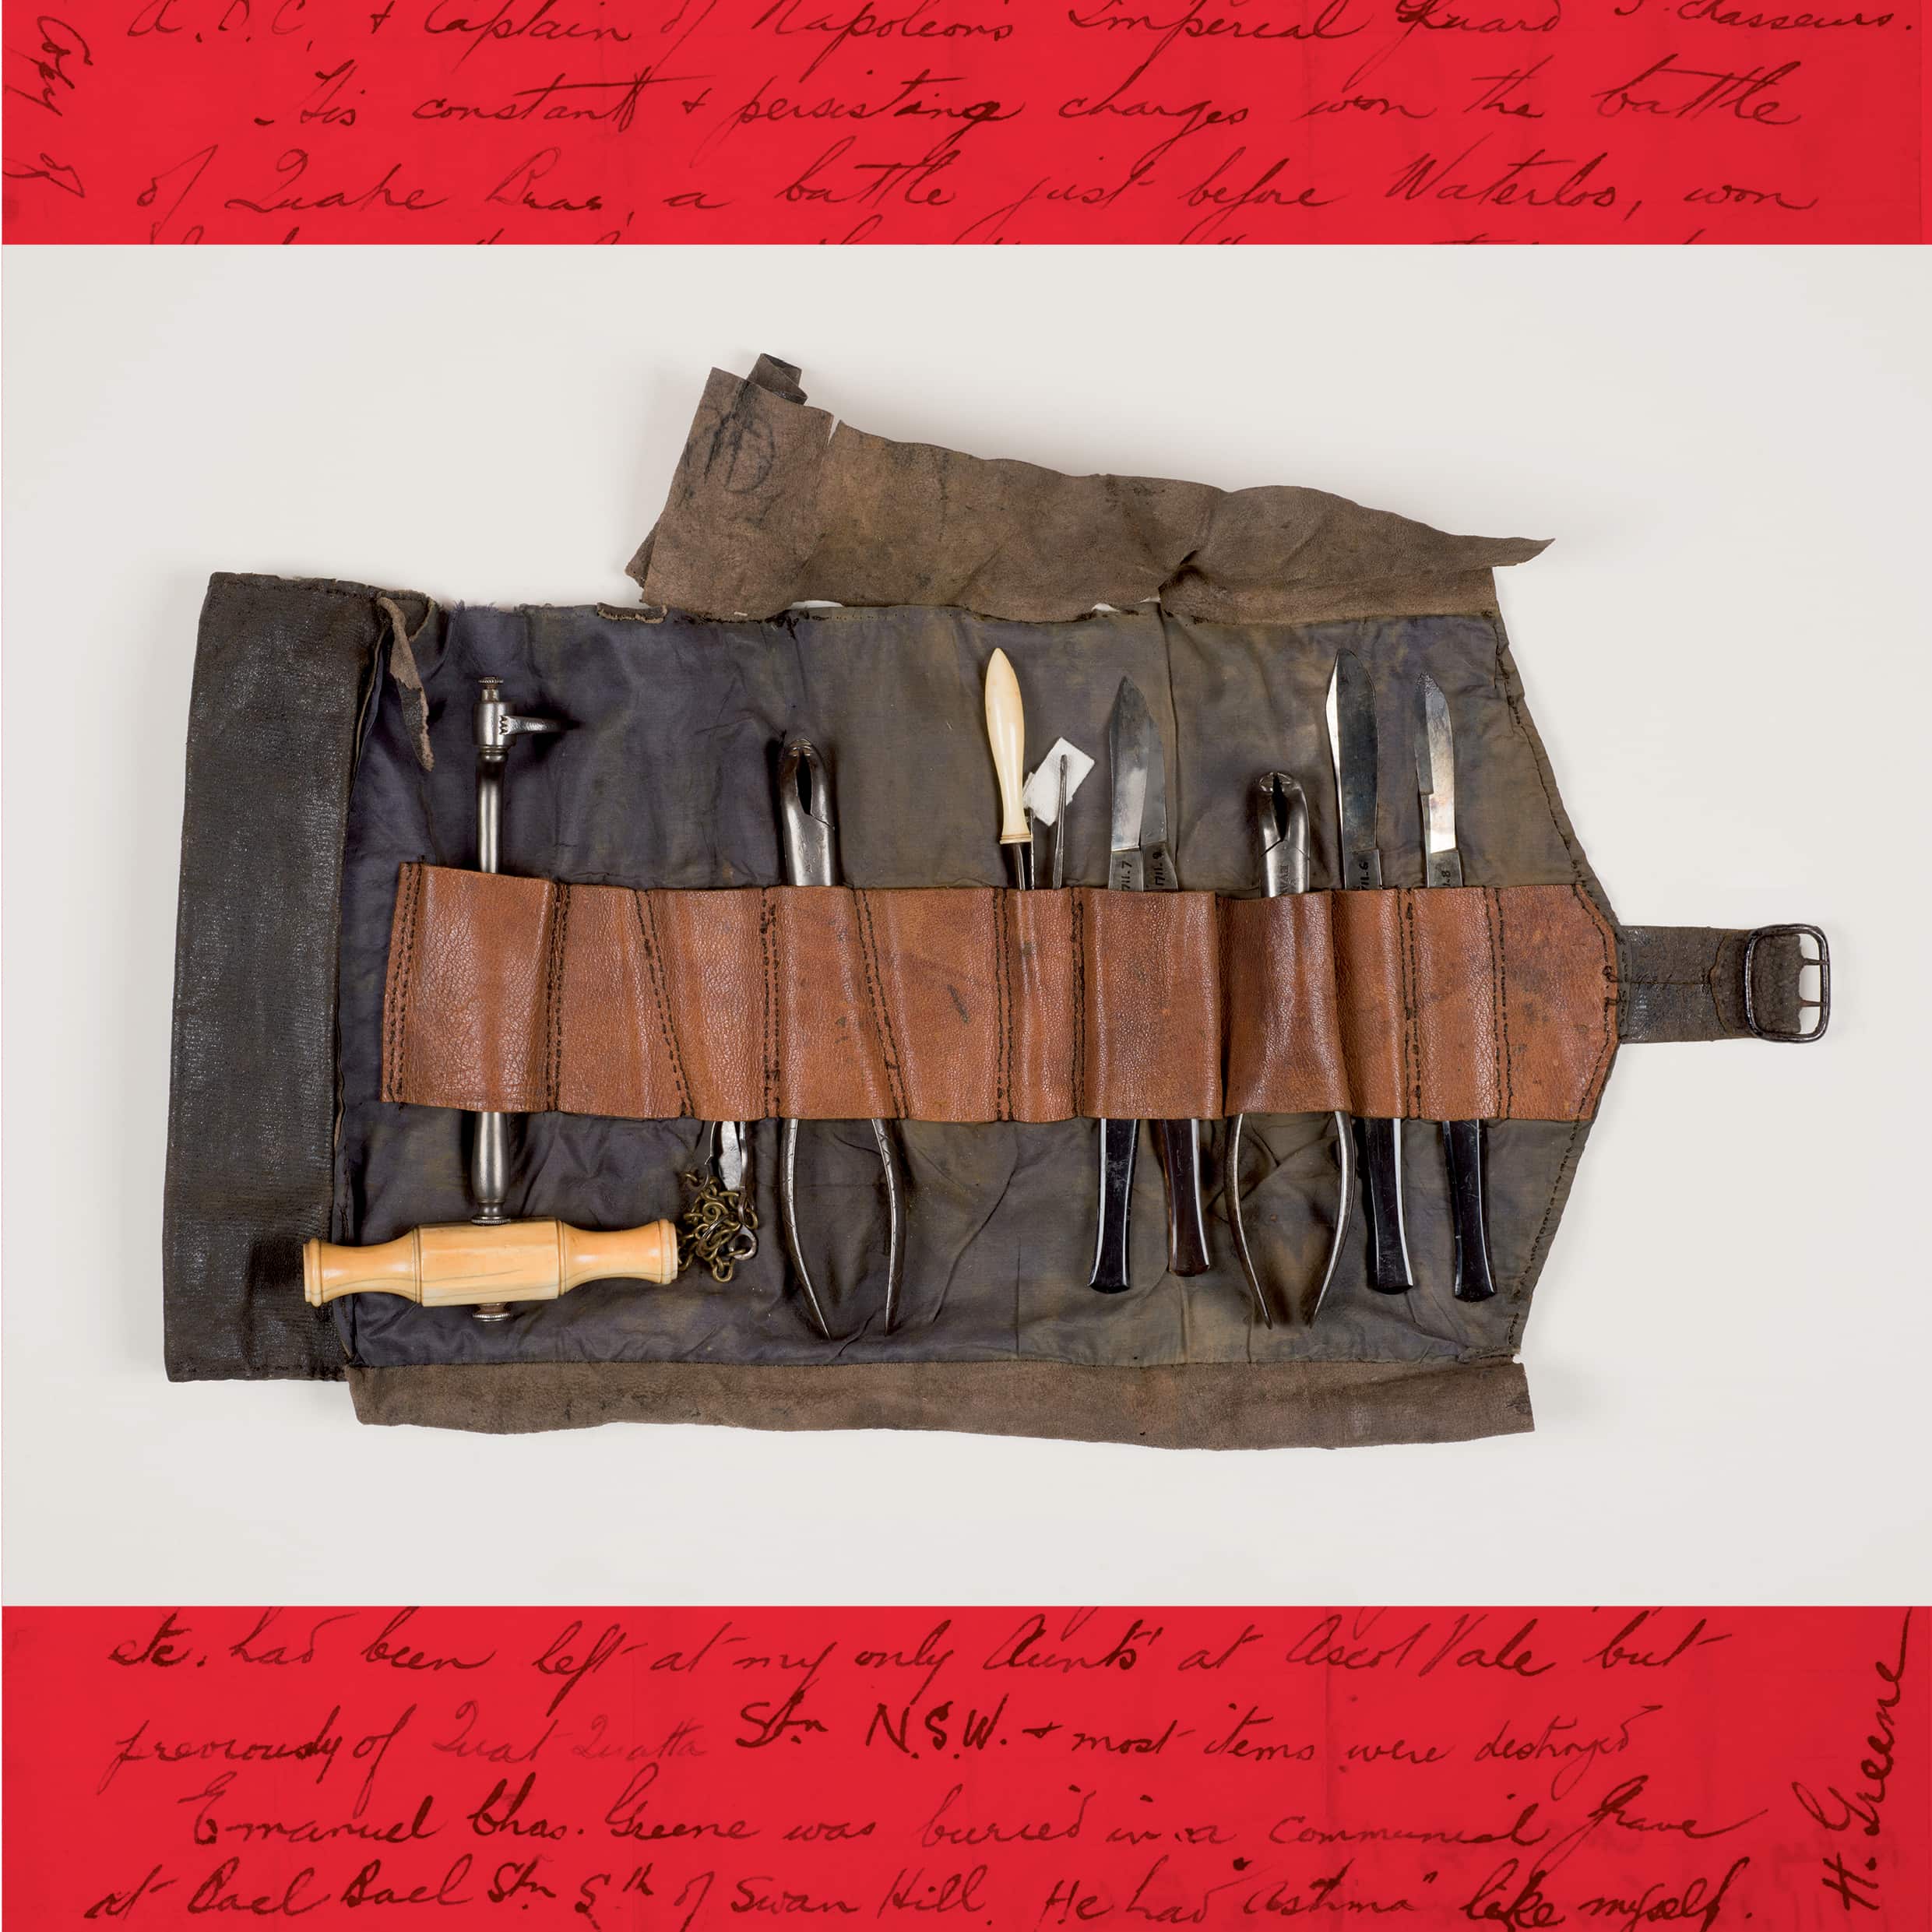 Osborne & Sons, Instrument roll, c. 1800, leather, fabric, metal, wood, celluloid, bone; roll: 5.5 × 20.5 × 11.0 cm. MHM01711, gift of Victor Henri De Savary Greene 1950s, Medical History Museum, University of Melbourne. 